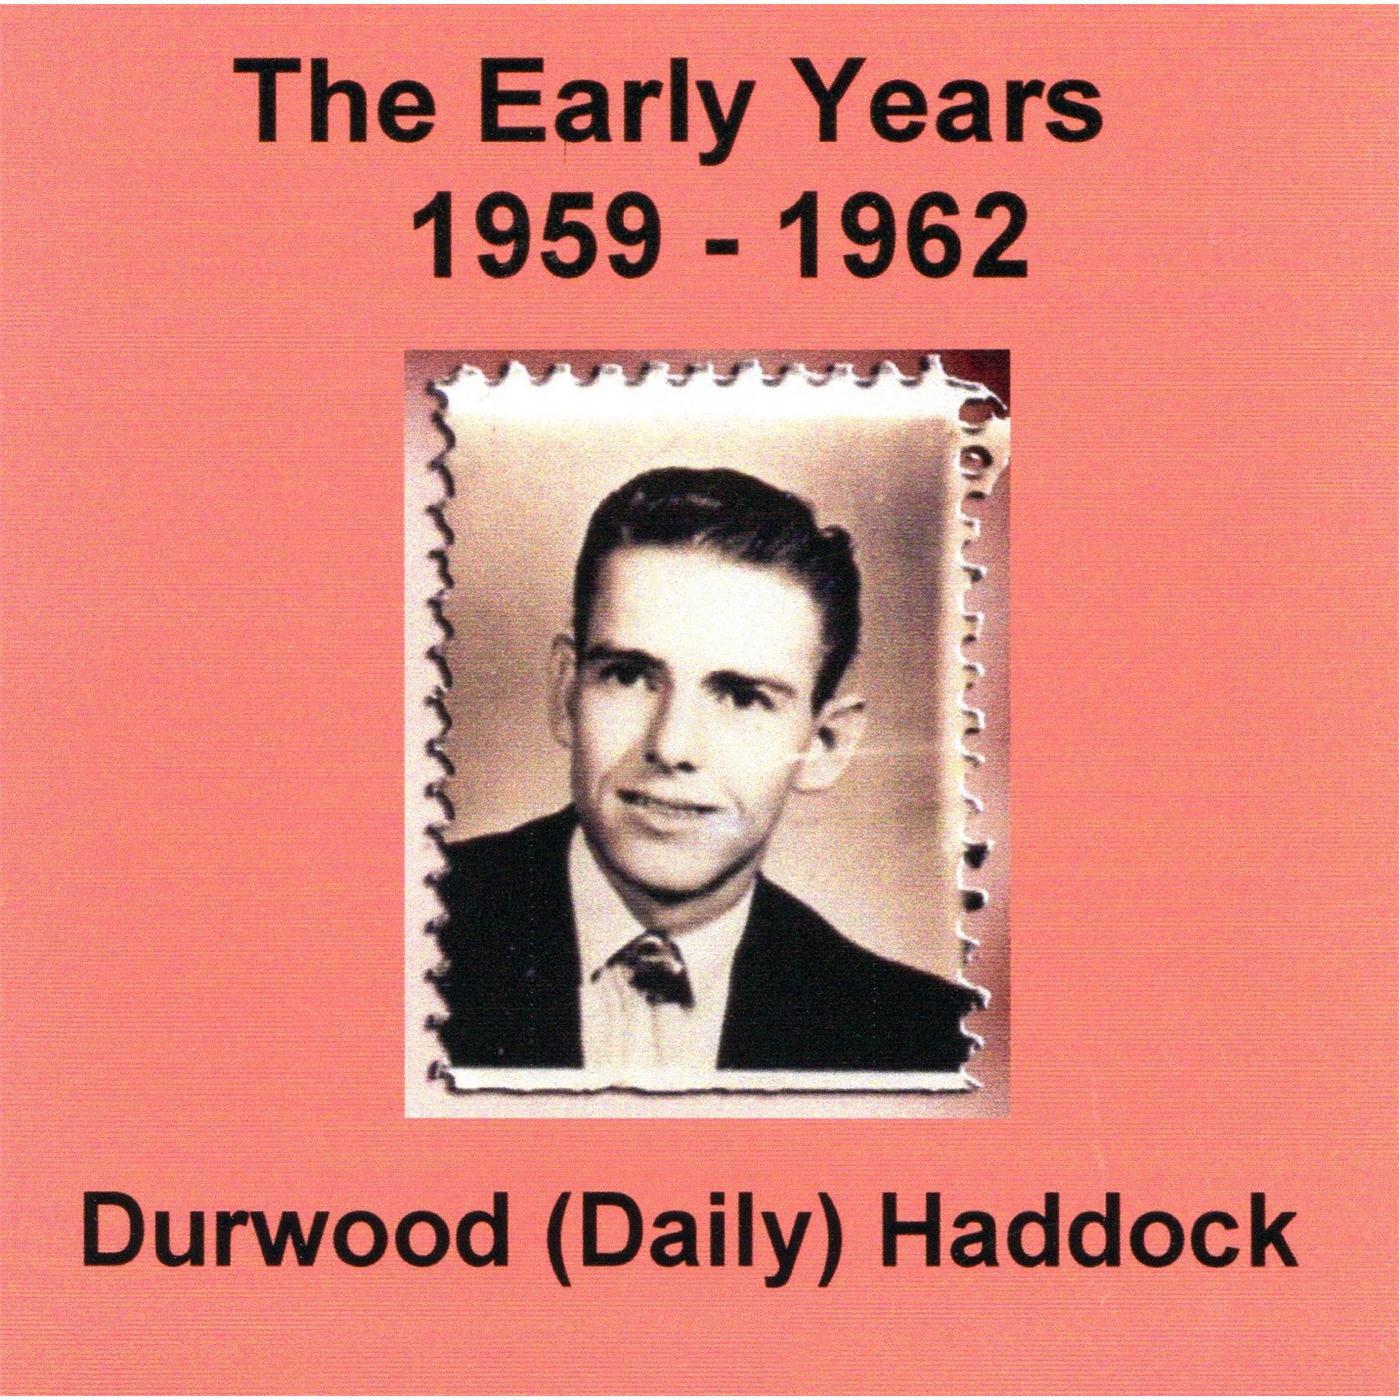 How Lonesome Can I Get歌词 歌手Durwood Daily Haddock-专辑The Early Years (1959 - 1962)-单曲《How Lonesome Can I Get》LRC歌词下载